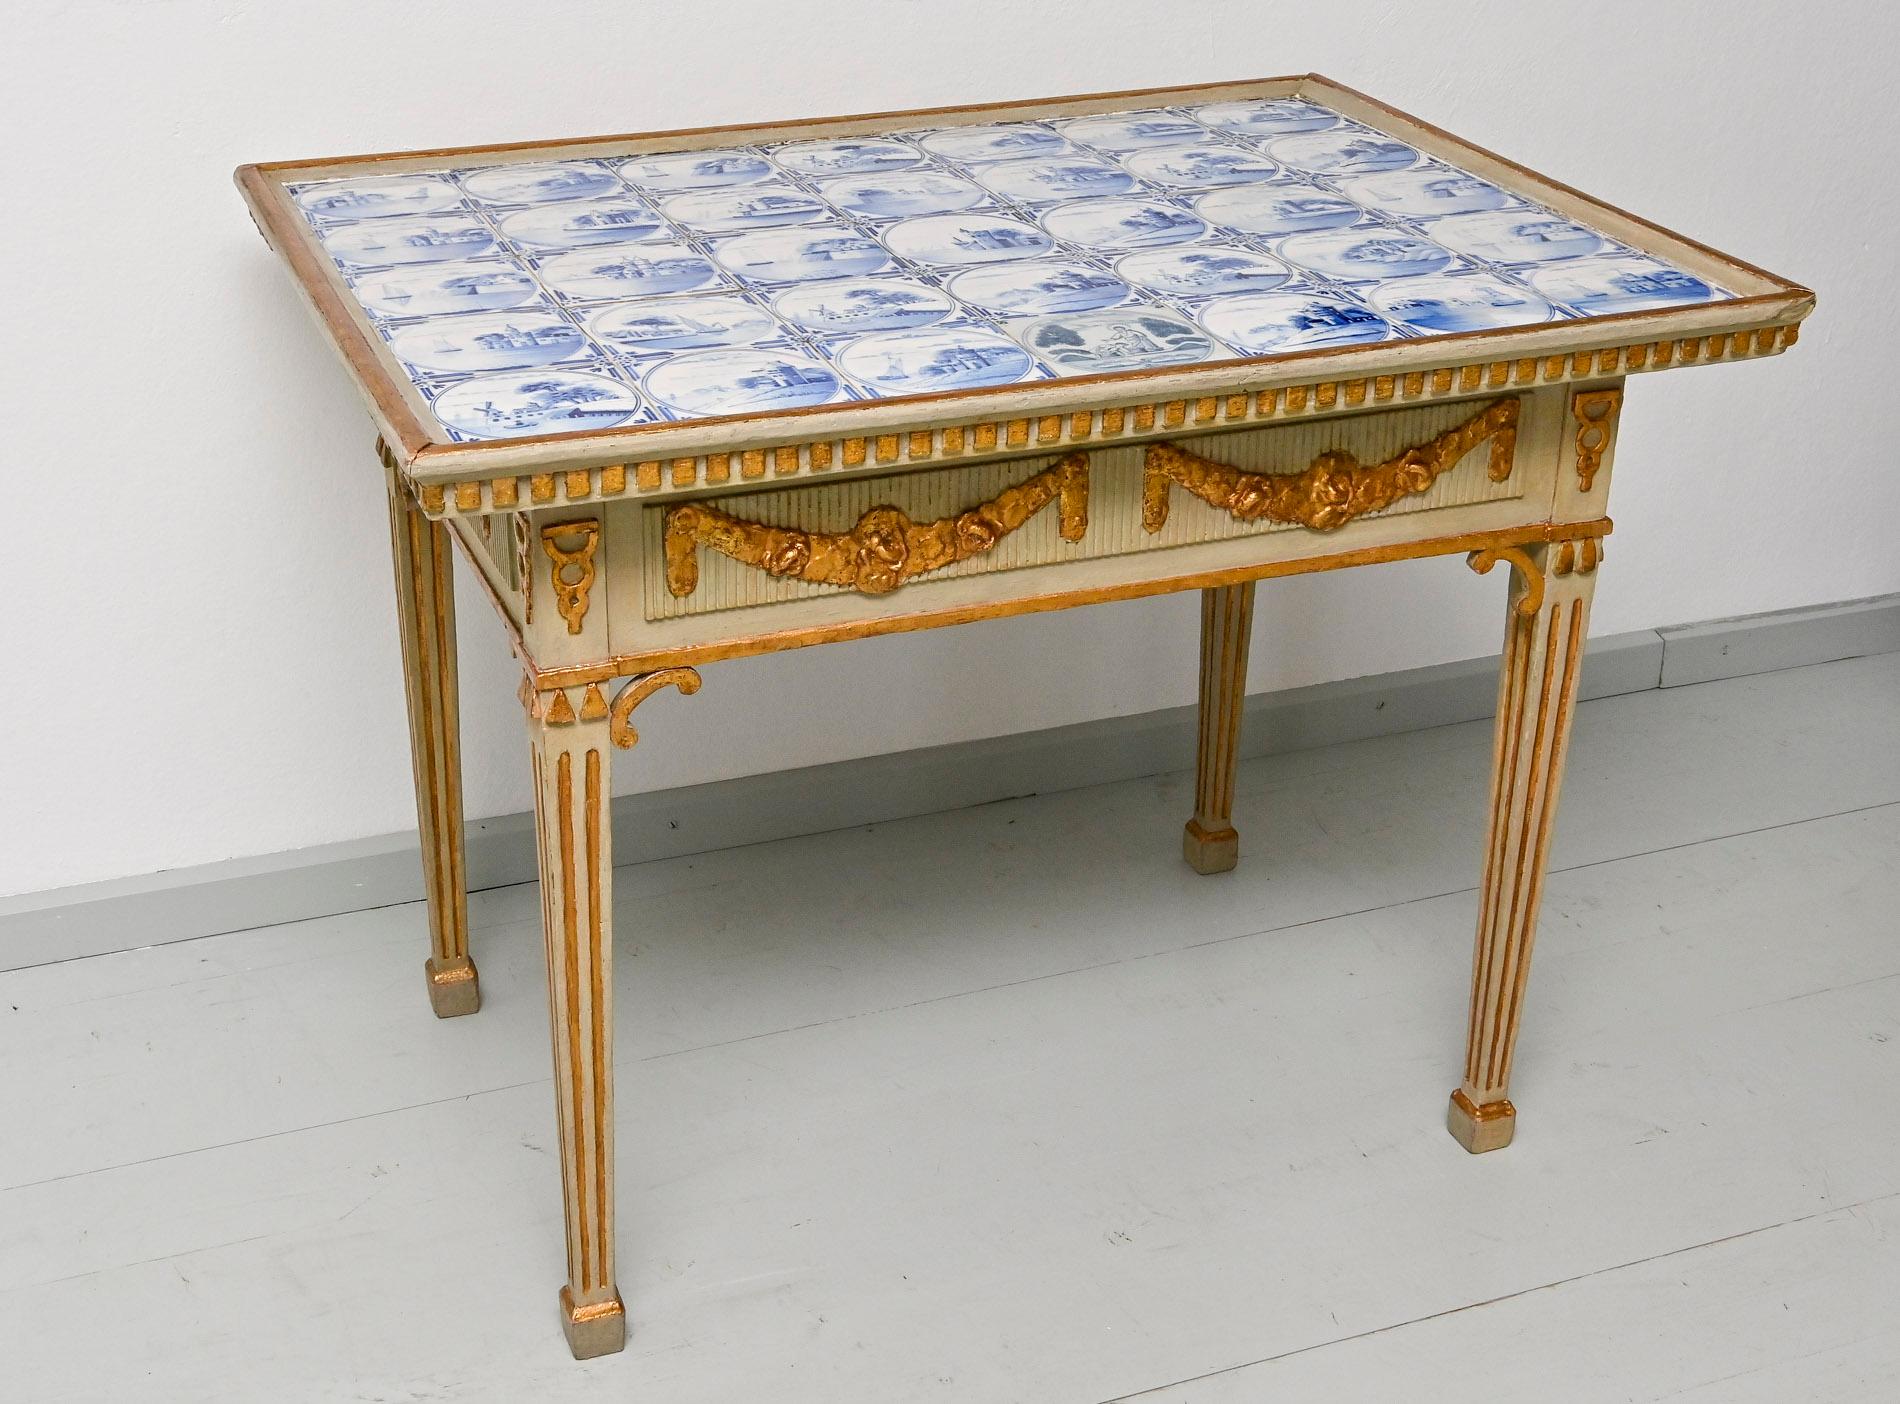 Softwood 18th Century Table with Delft Tiles Schleswig Holstein Gray and Gilding For Sale